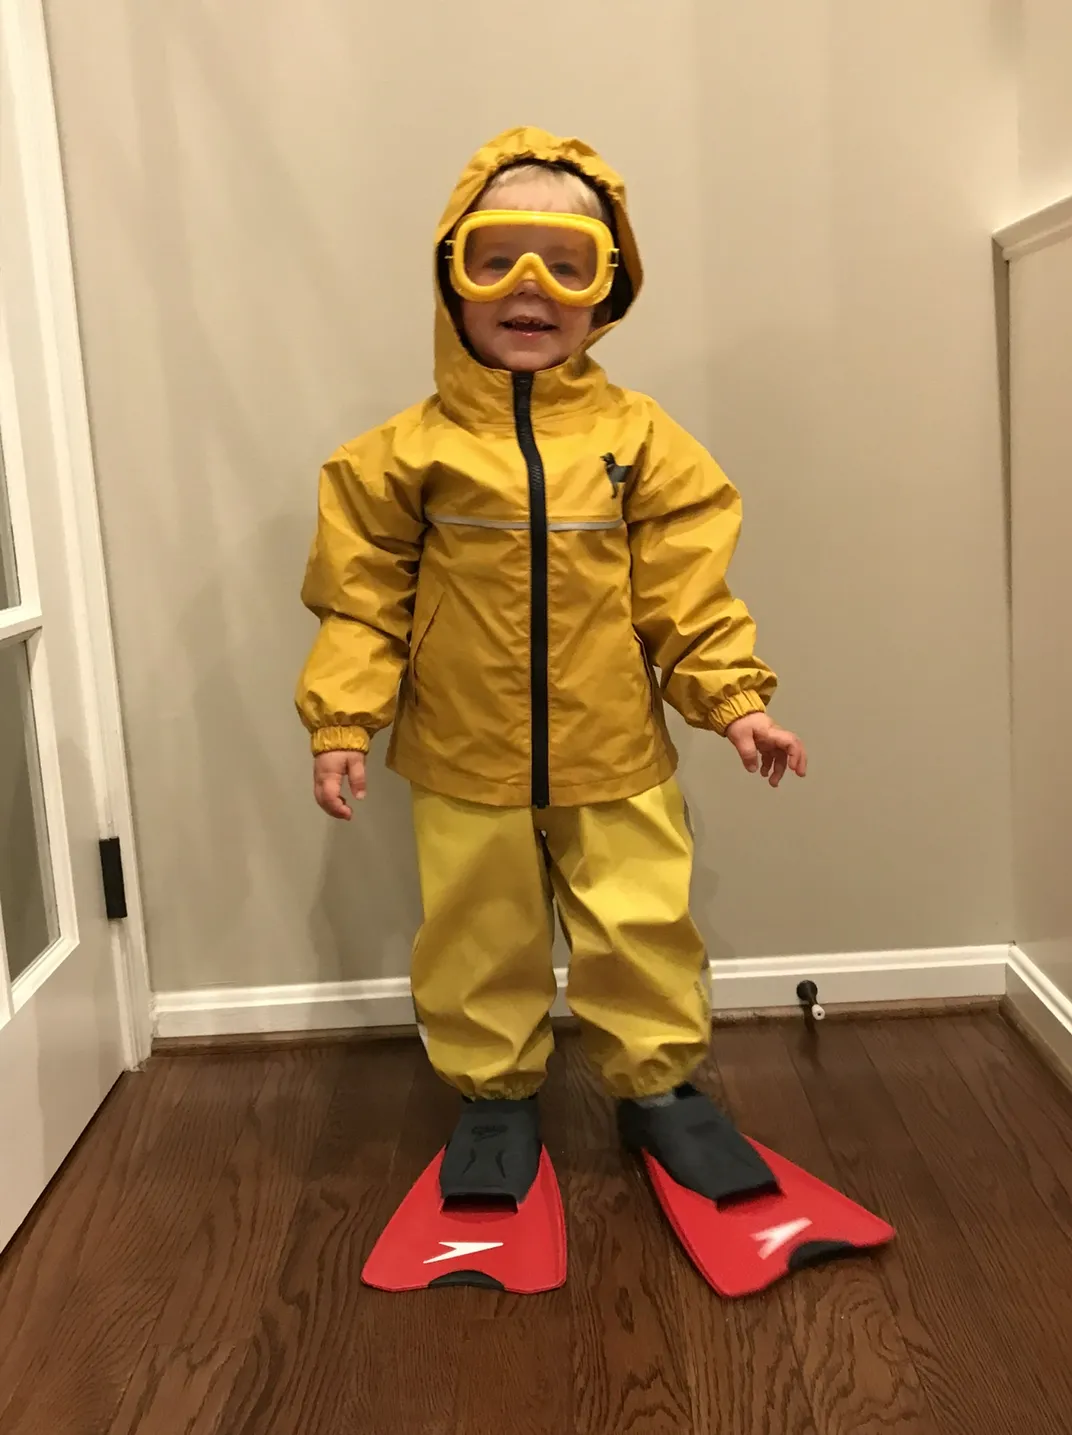 Young boy dresses up in raincoat, flippers, and goggles as part of dramatic play to mimic sea lion adaptations